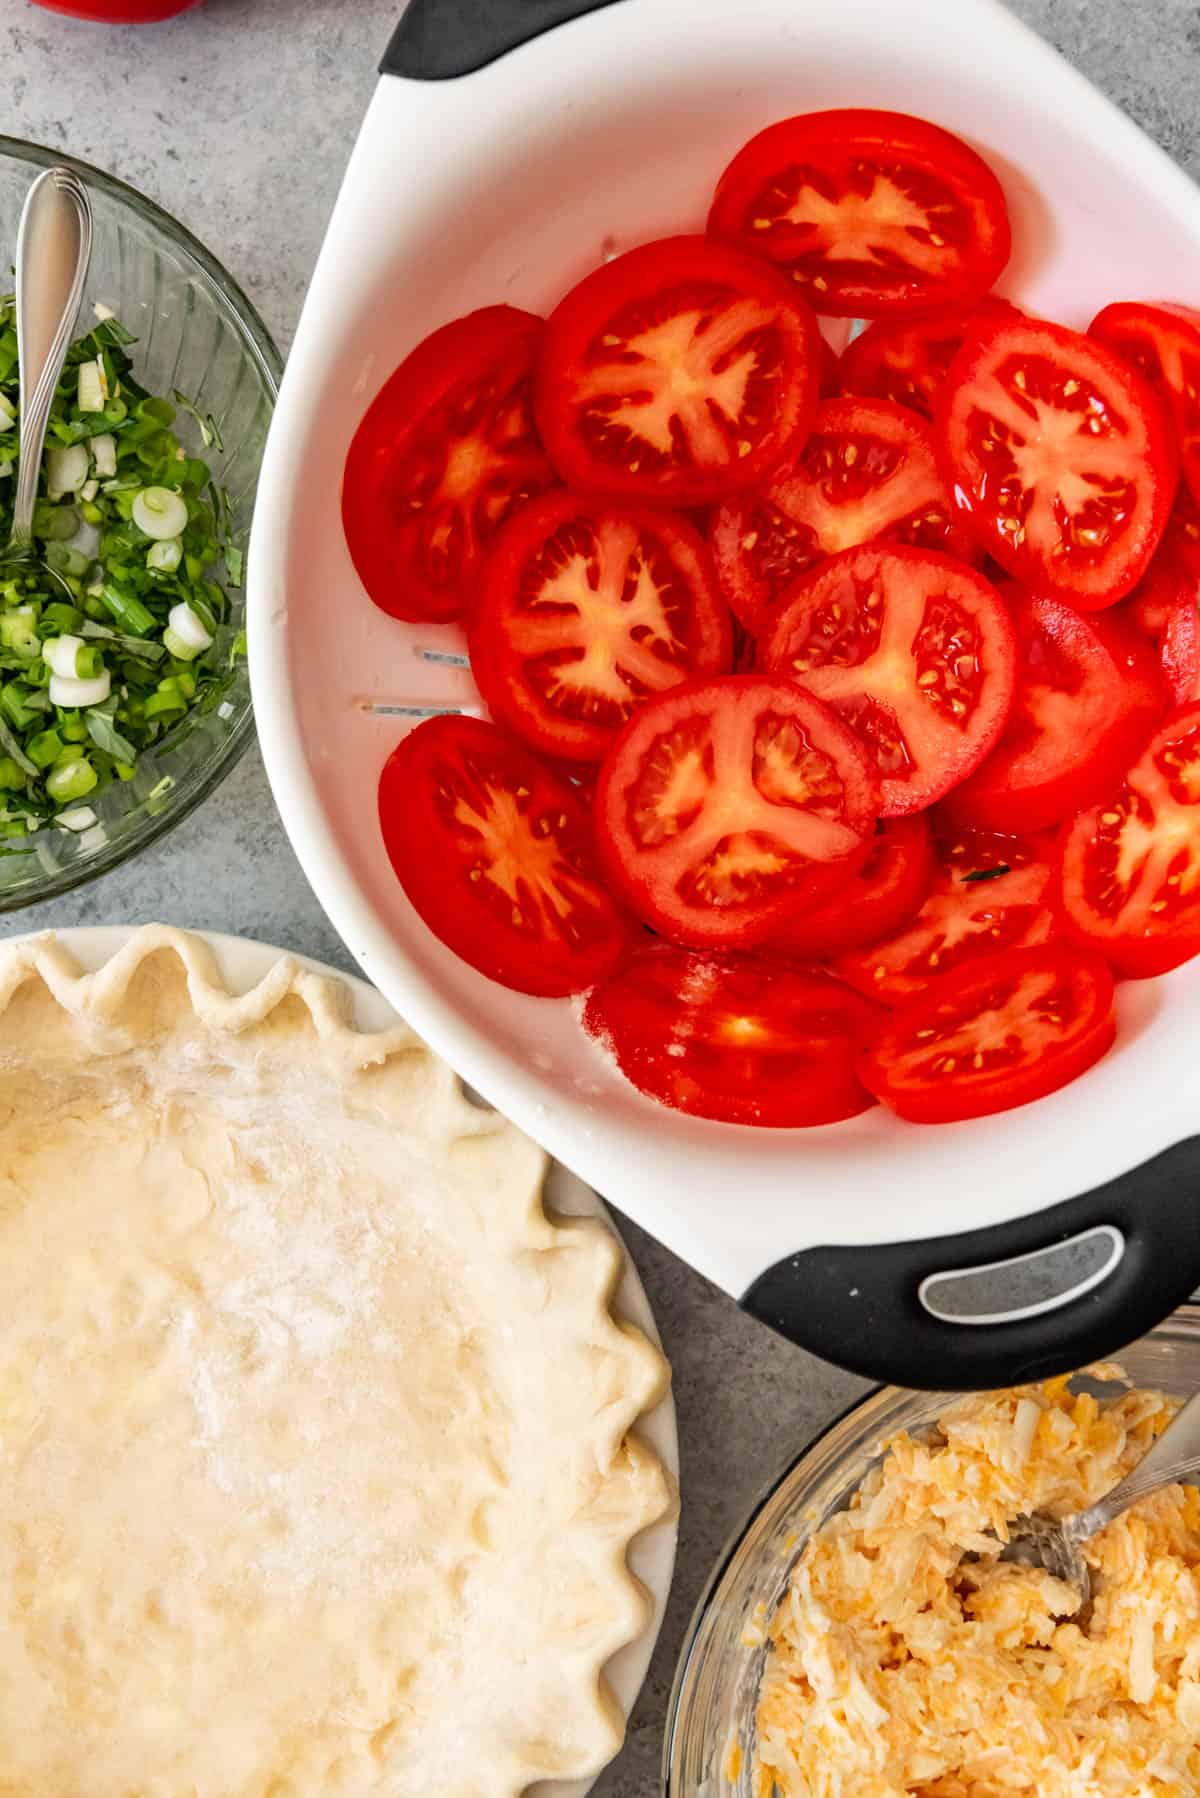 An image of the ingredients for a tomato pie - pie crust, tomatoes, cheese, mayo, green onions, and basil.